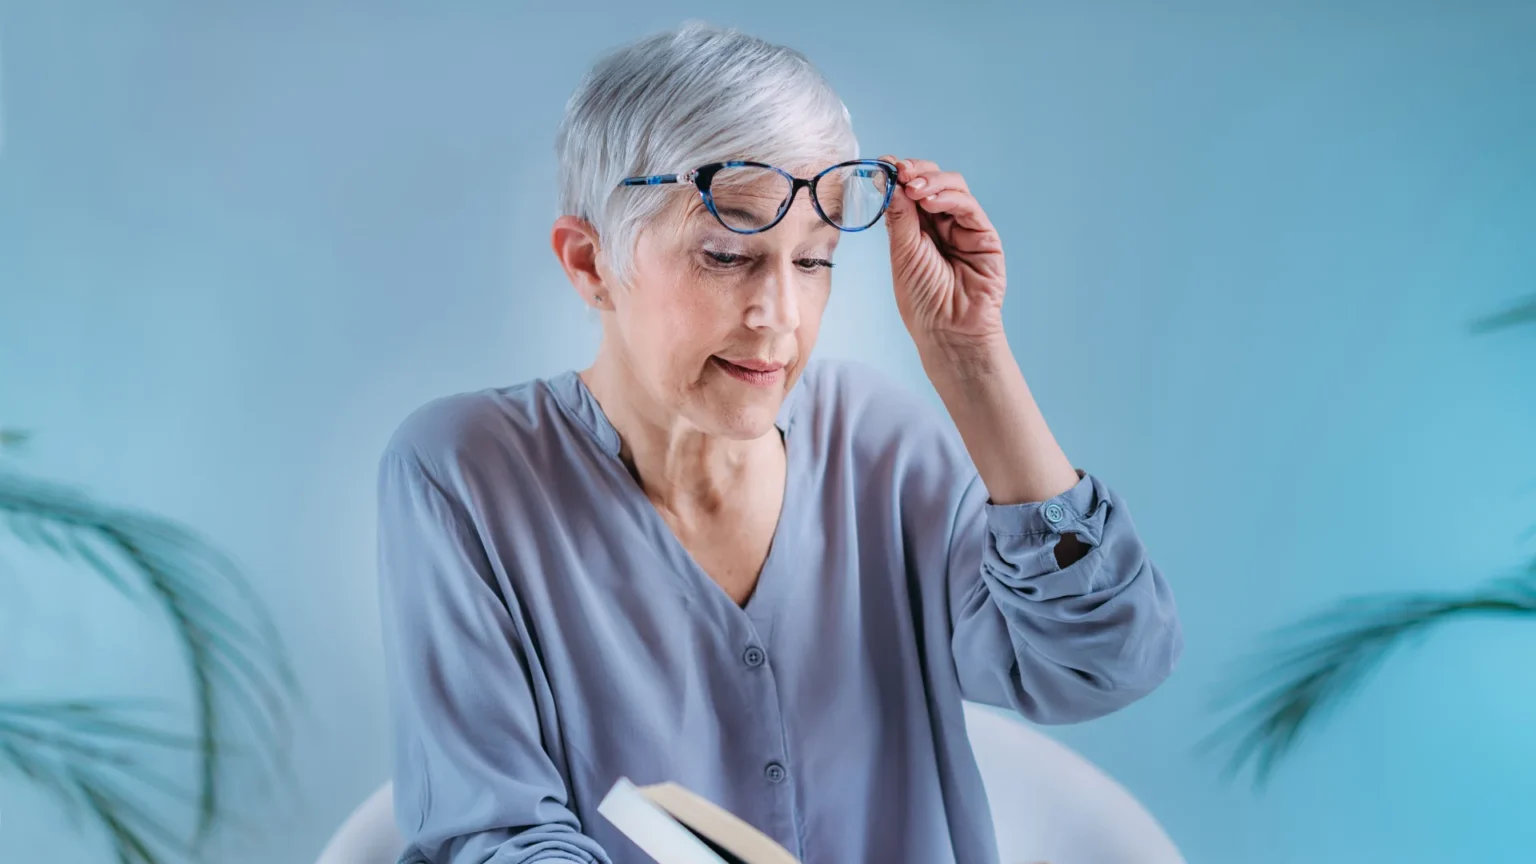 cataracts, cataract surgery, eye health, vision problems, blurred vision, cloudy vision, treatment for cataracts, causes of cataracts, symptoms of cataracts, eye care, healthy aging